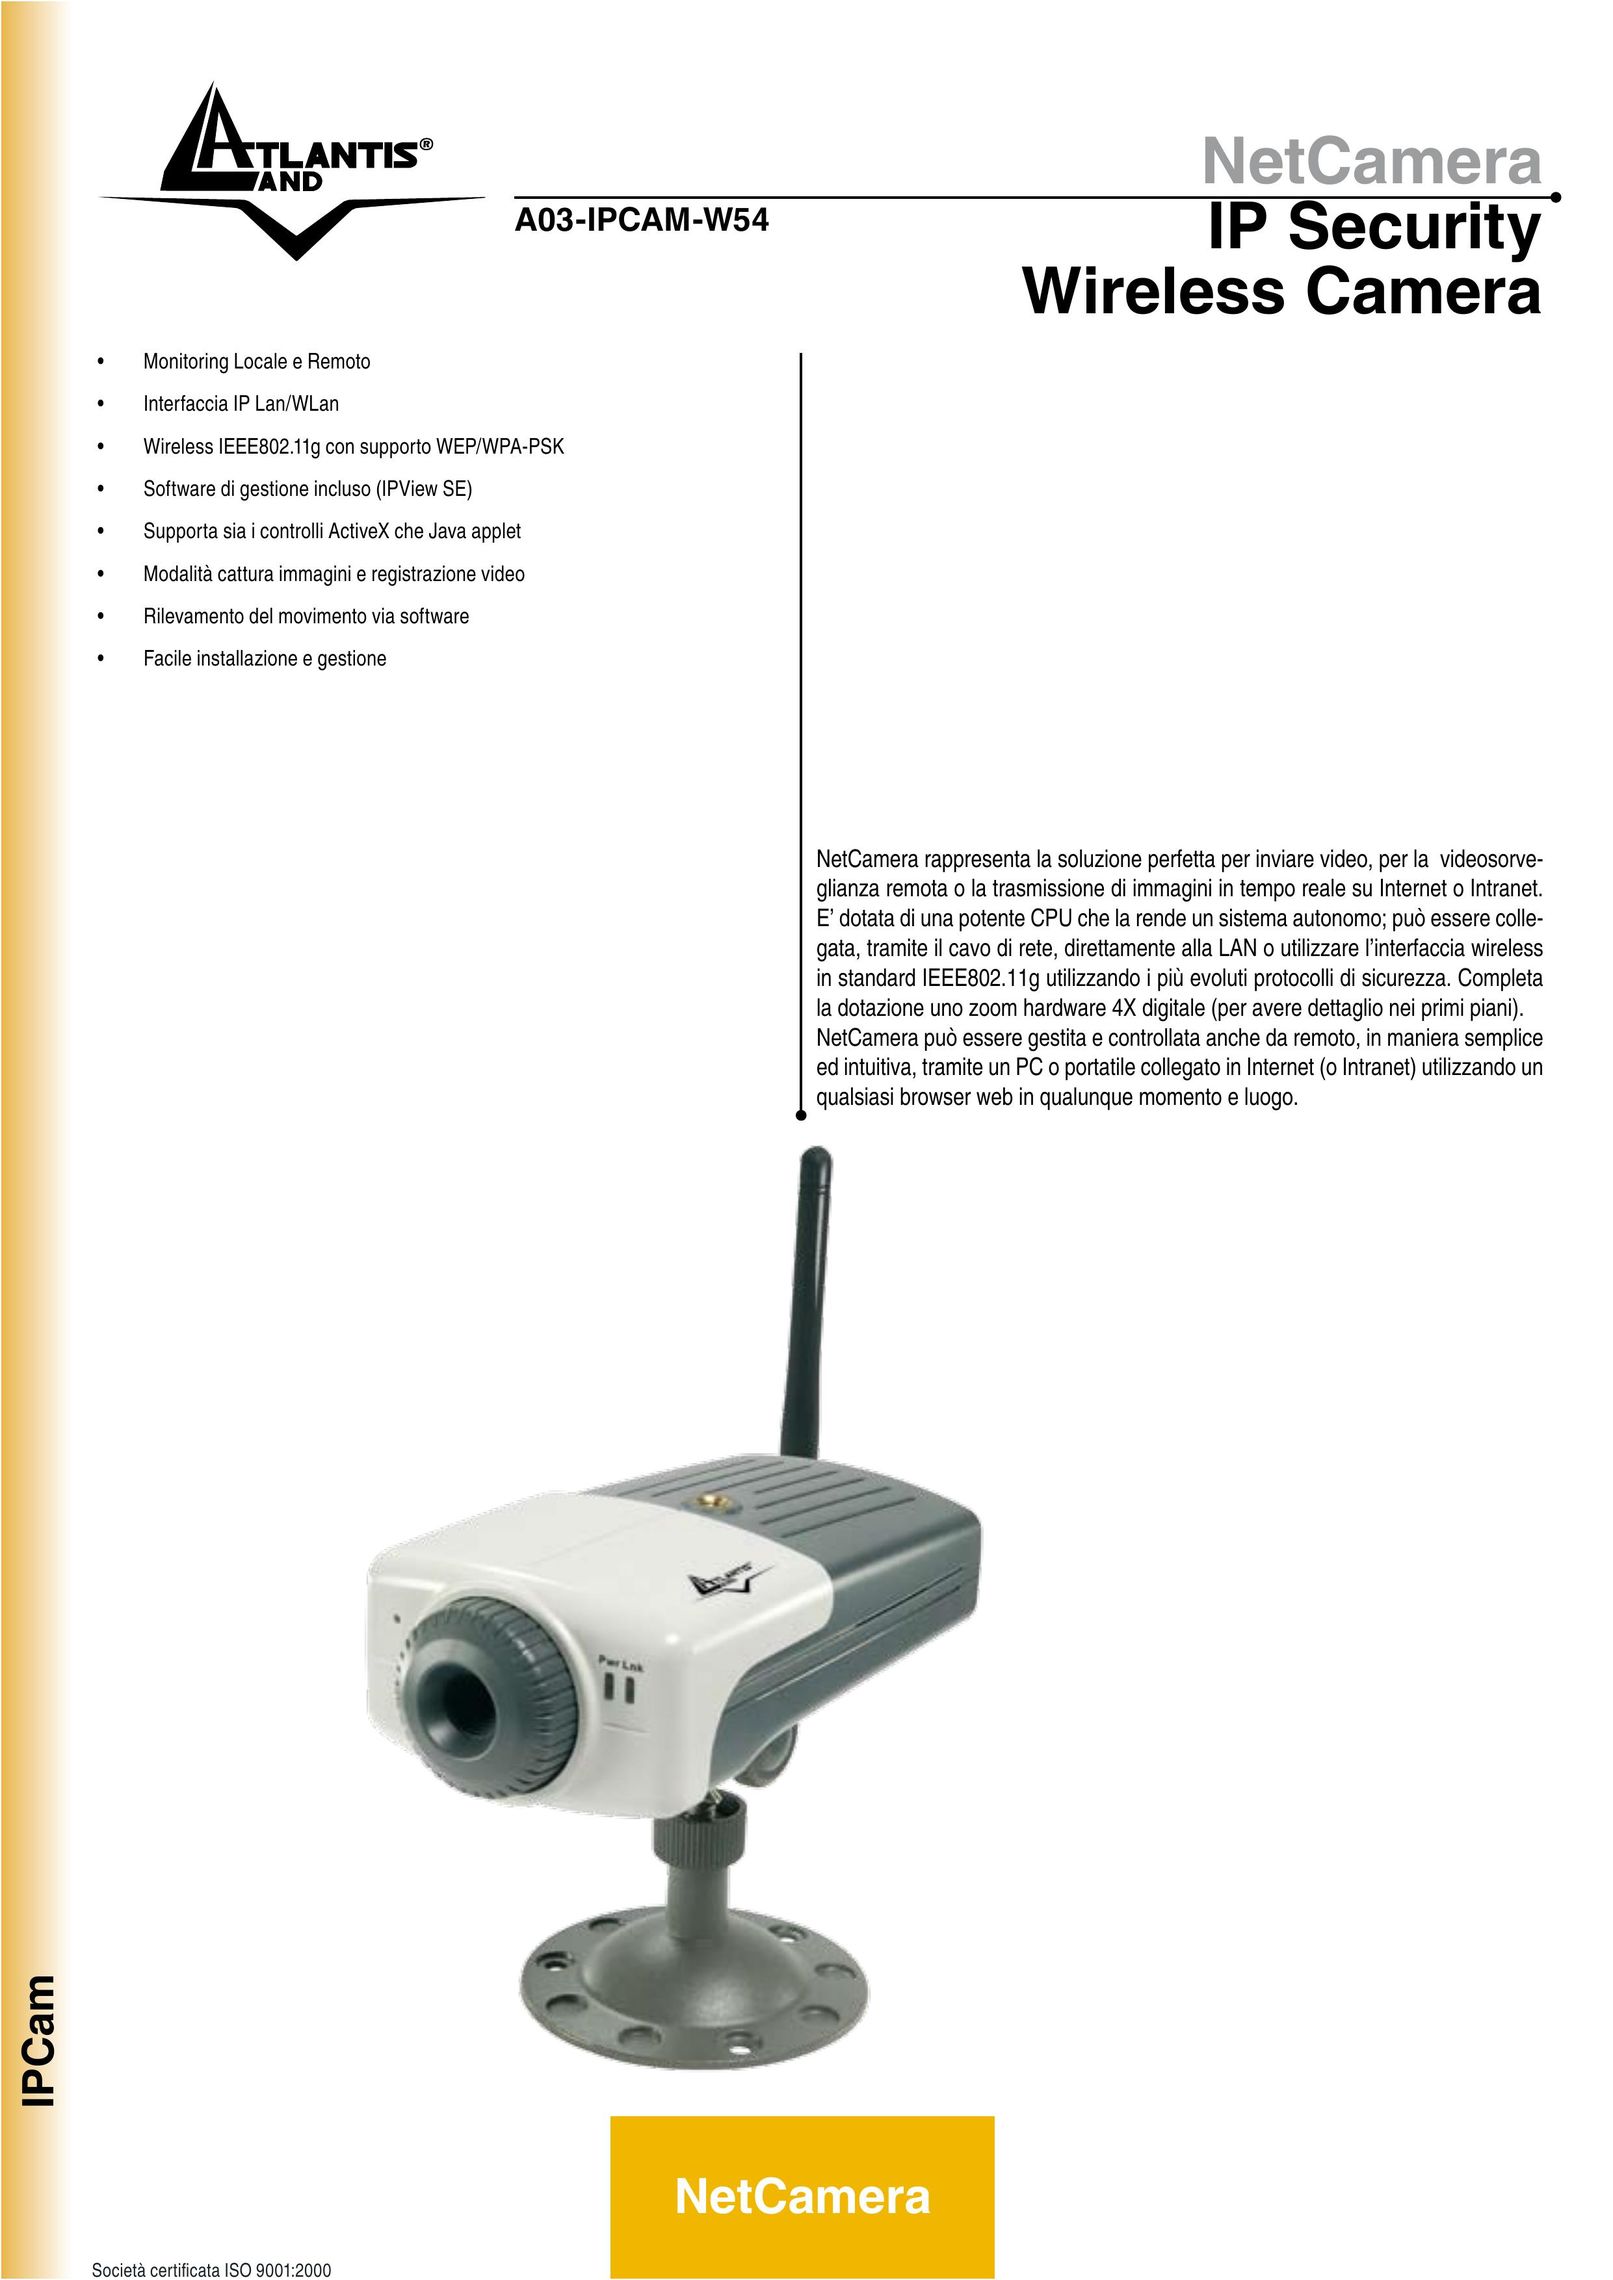 Atlantis Land A03-IPCAM-W54 Home Security System User Manual